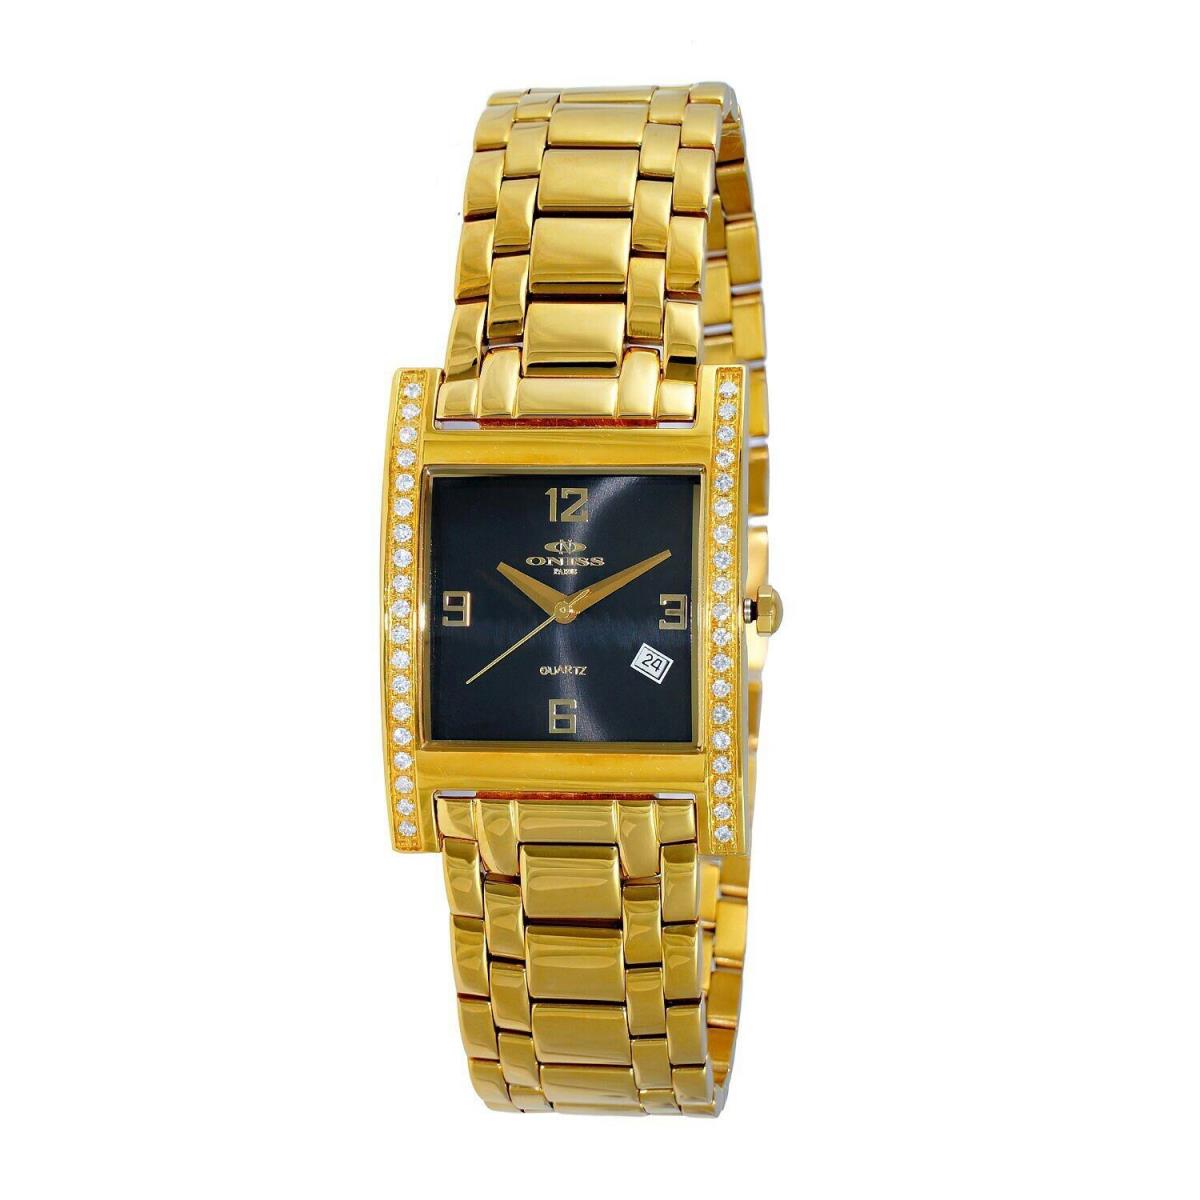 Oniss ON8300-44 Ladies Swiss SS Crystal Watch-gold Tone/ with Black Face Watch